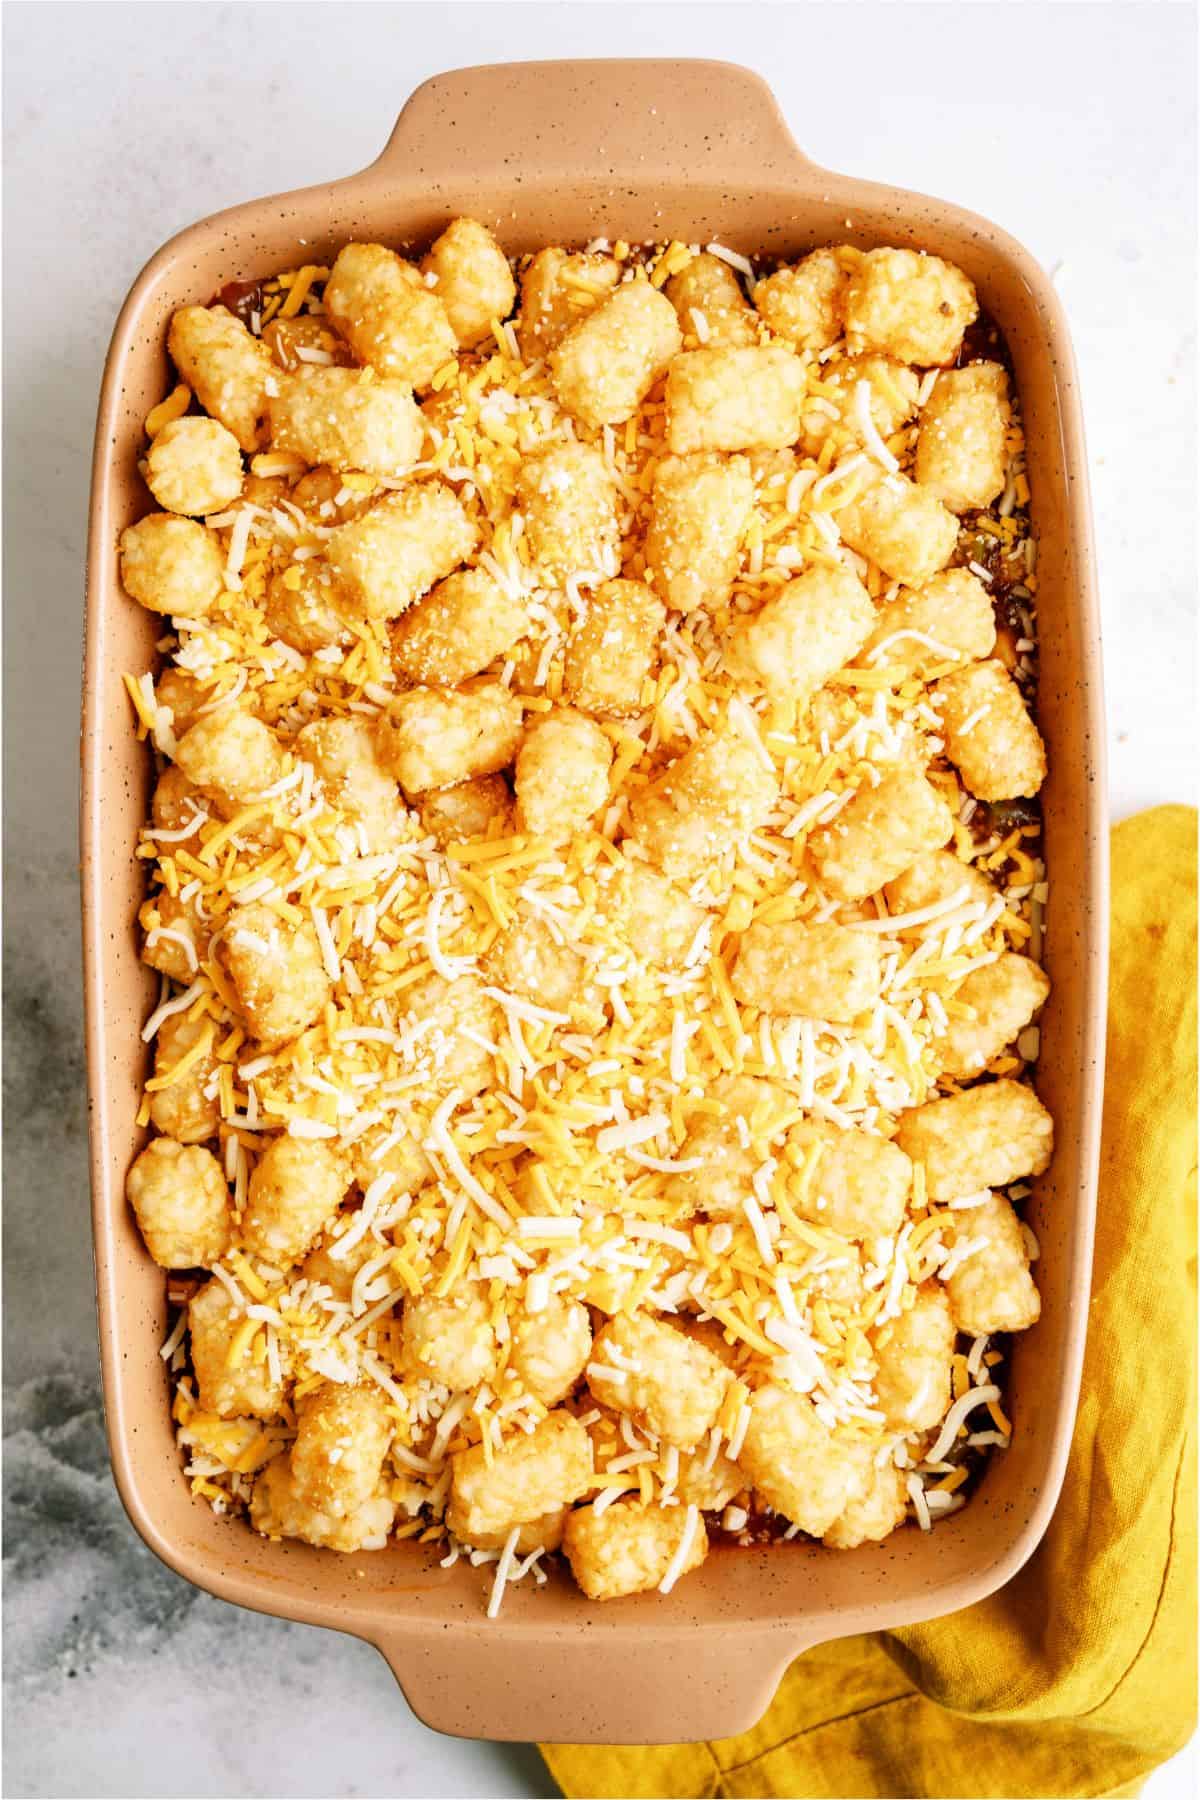 Unbaked BBQ Tater Tot Casserole in casserole dish